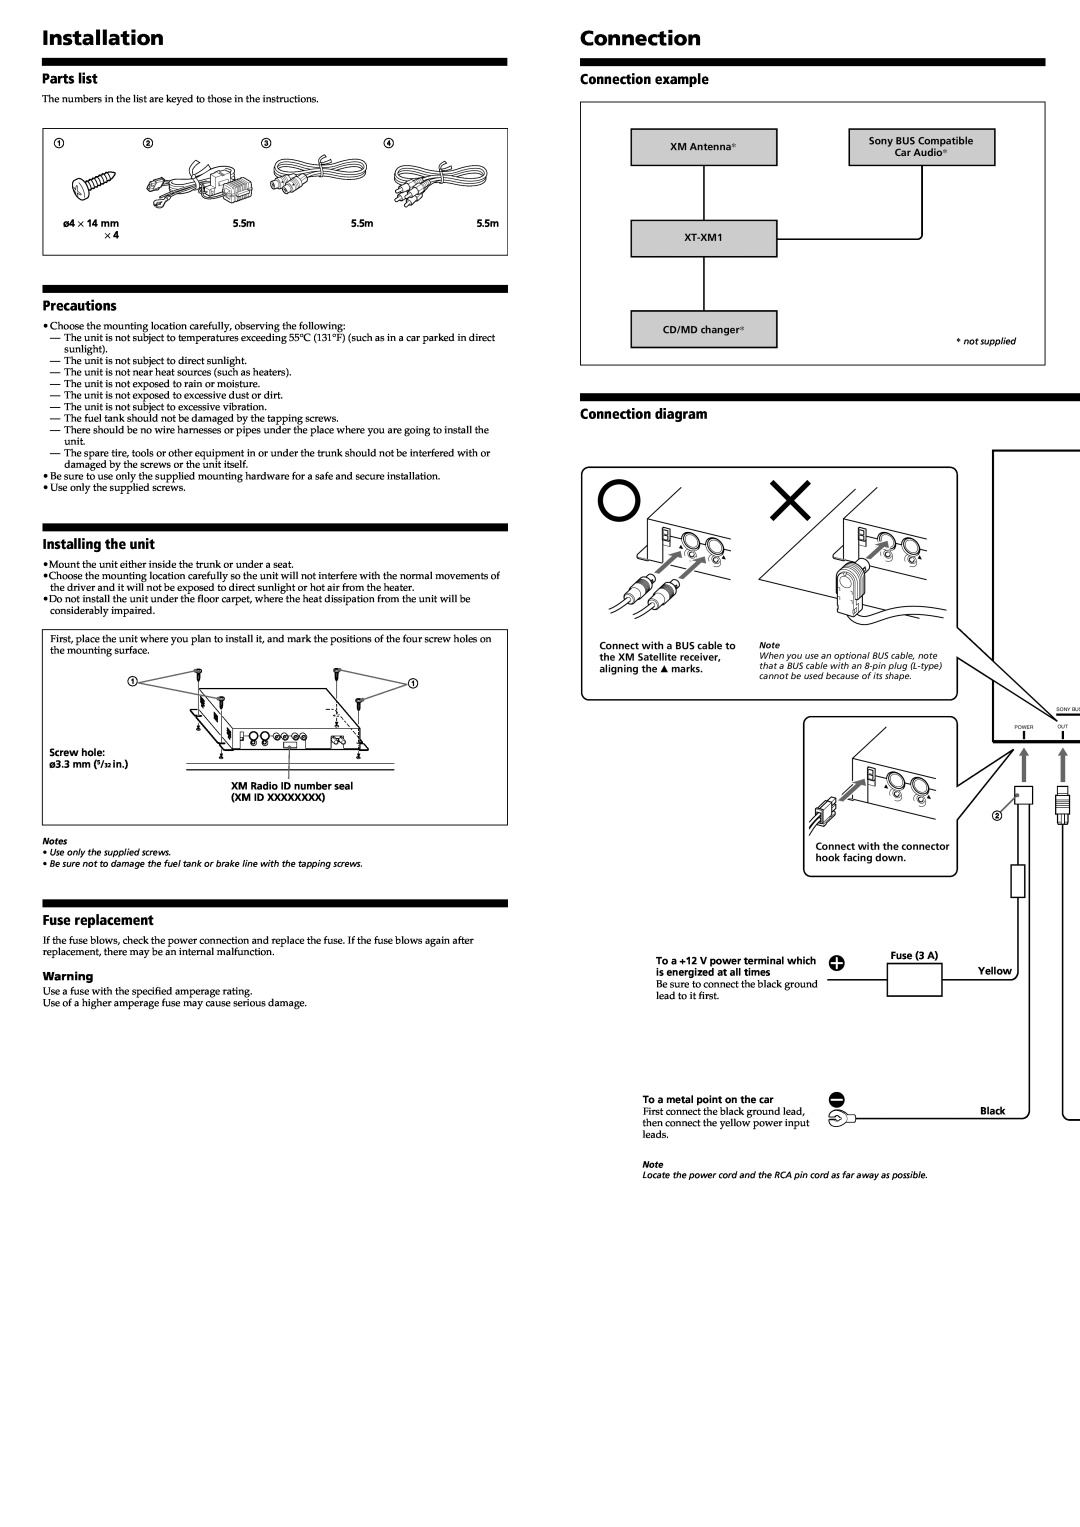 Sony XT-XM1 Installation, Parts list, Precautions, Installing the unit, Connection example, Connection diagram 